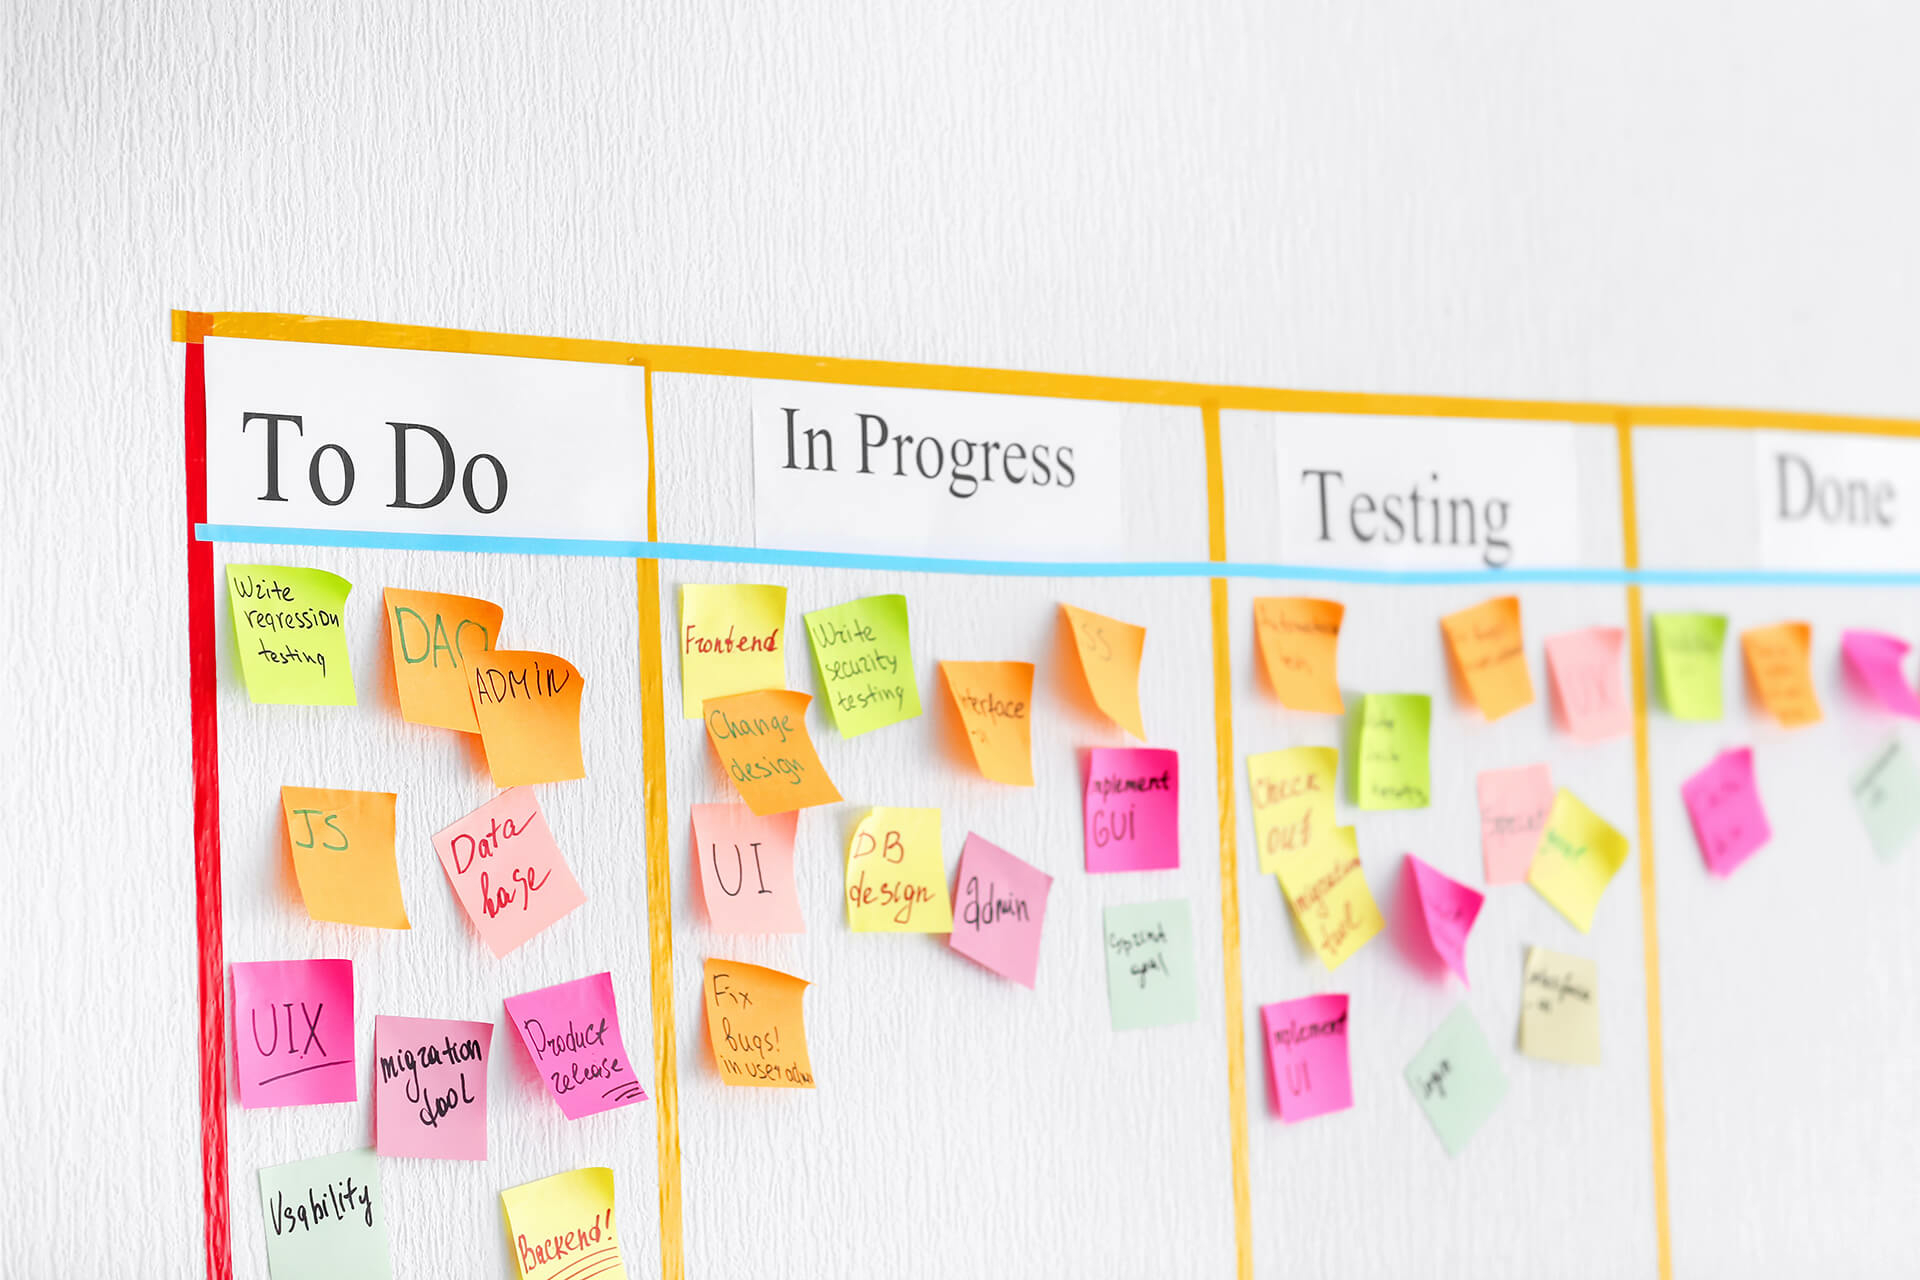 Scrum and Kanban: Two Powerful Agile Methodologies Explained